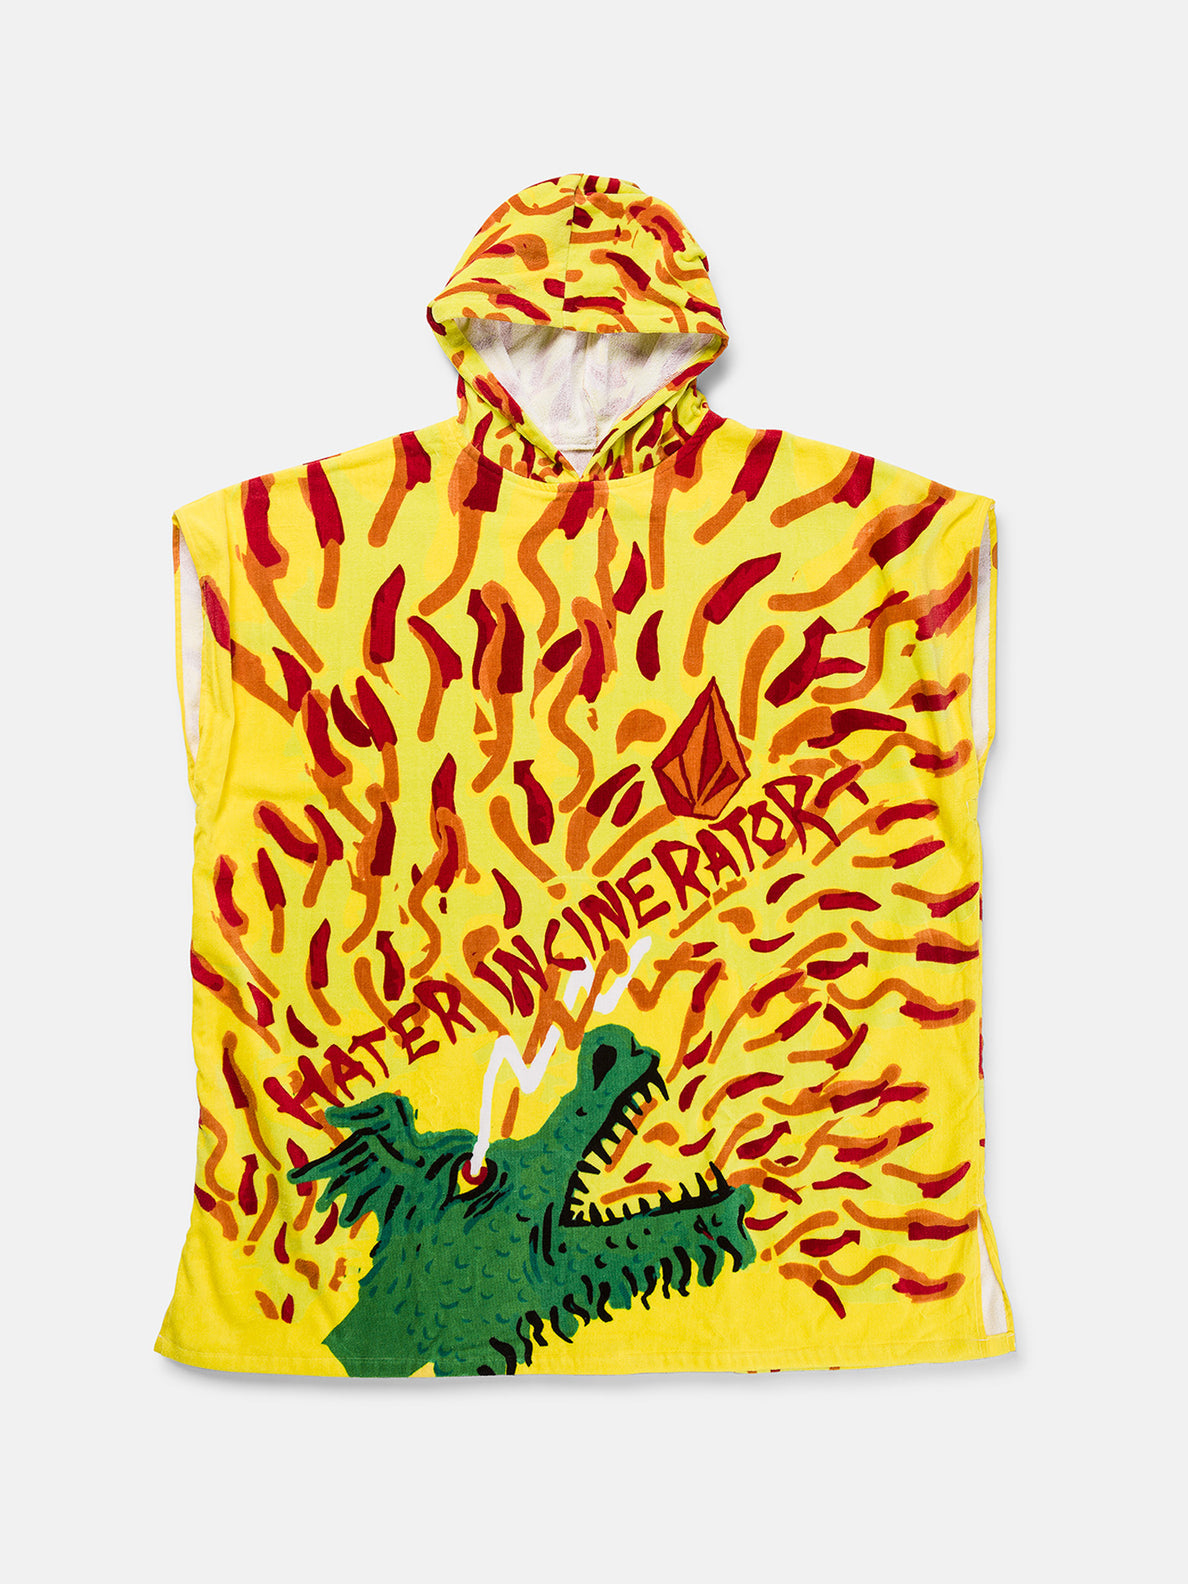 FEATURED ARTIST OZZY WRONG HOODED TOWEL